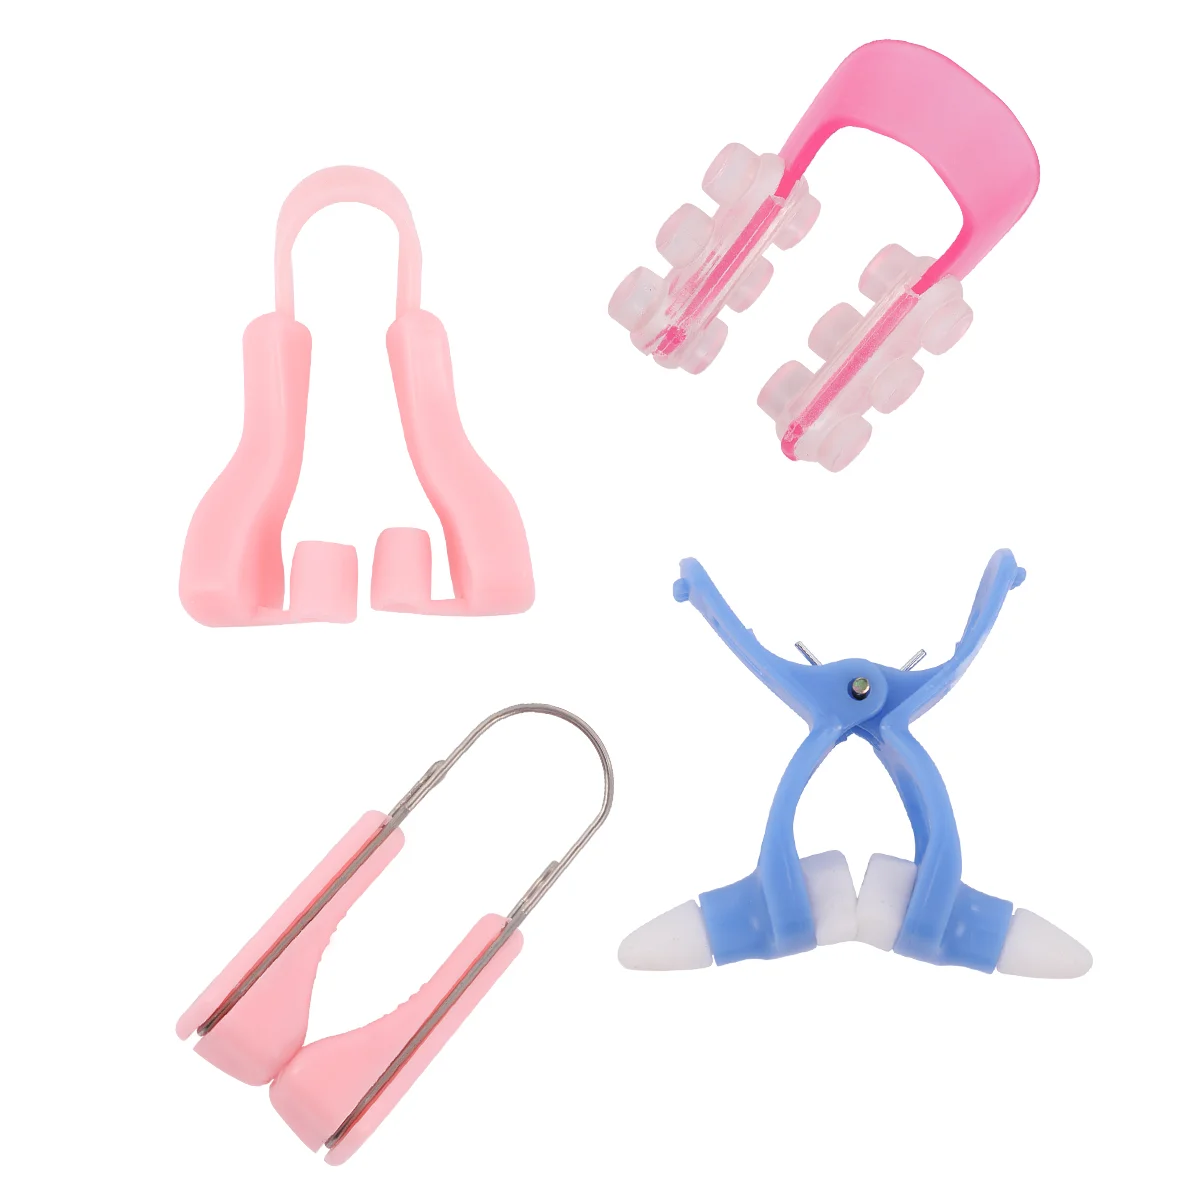 

Nose Clip Shaper Bridge Shaping Lifting Up Silicone Lifter Beauty Big Increased Tool Correctors Straightening Clips Device Nasal